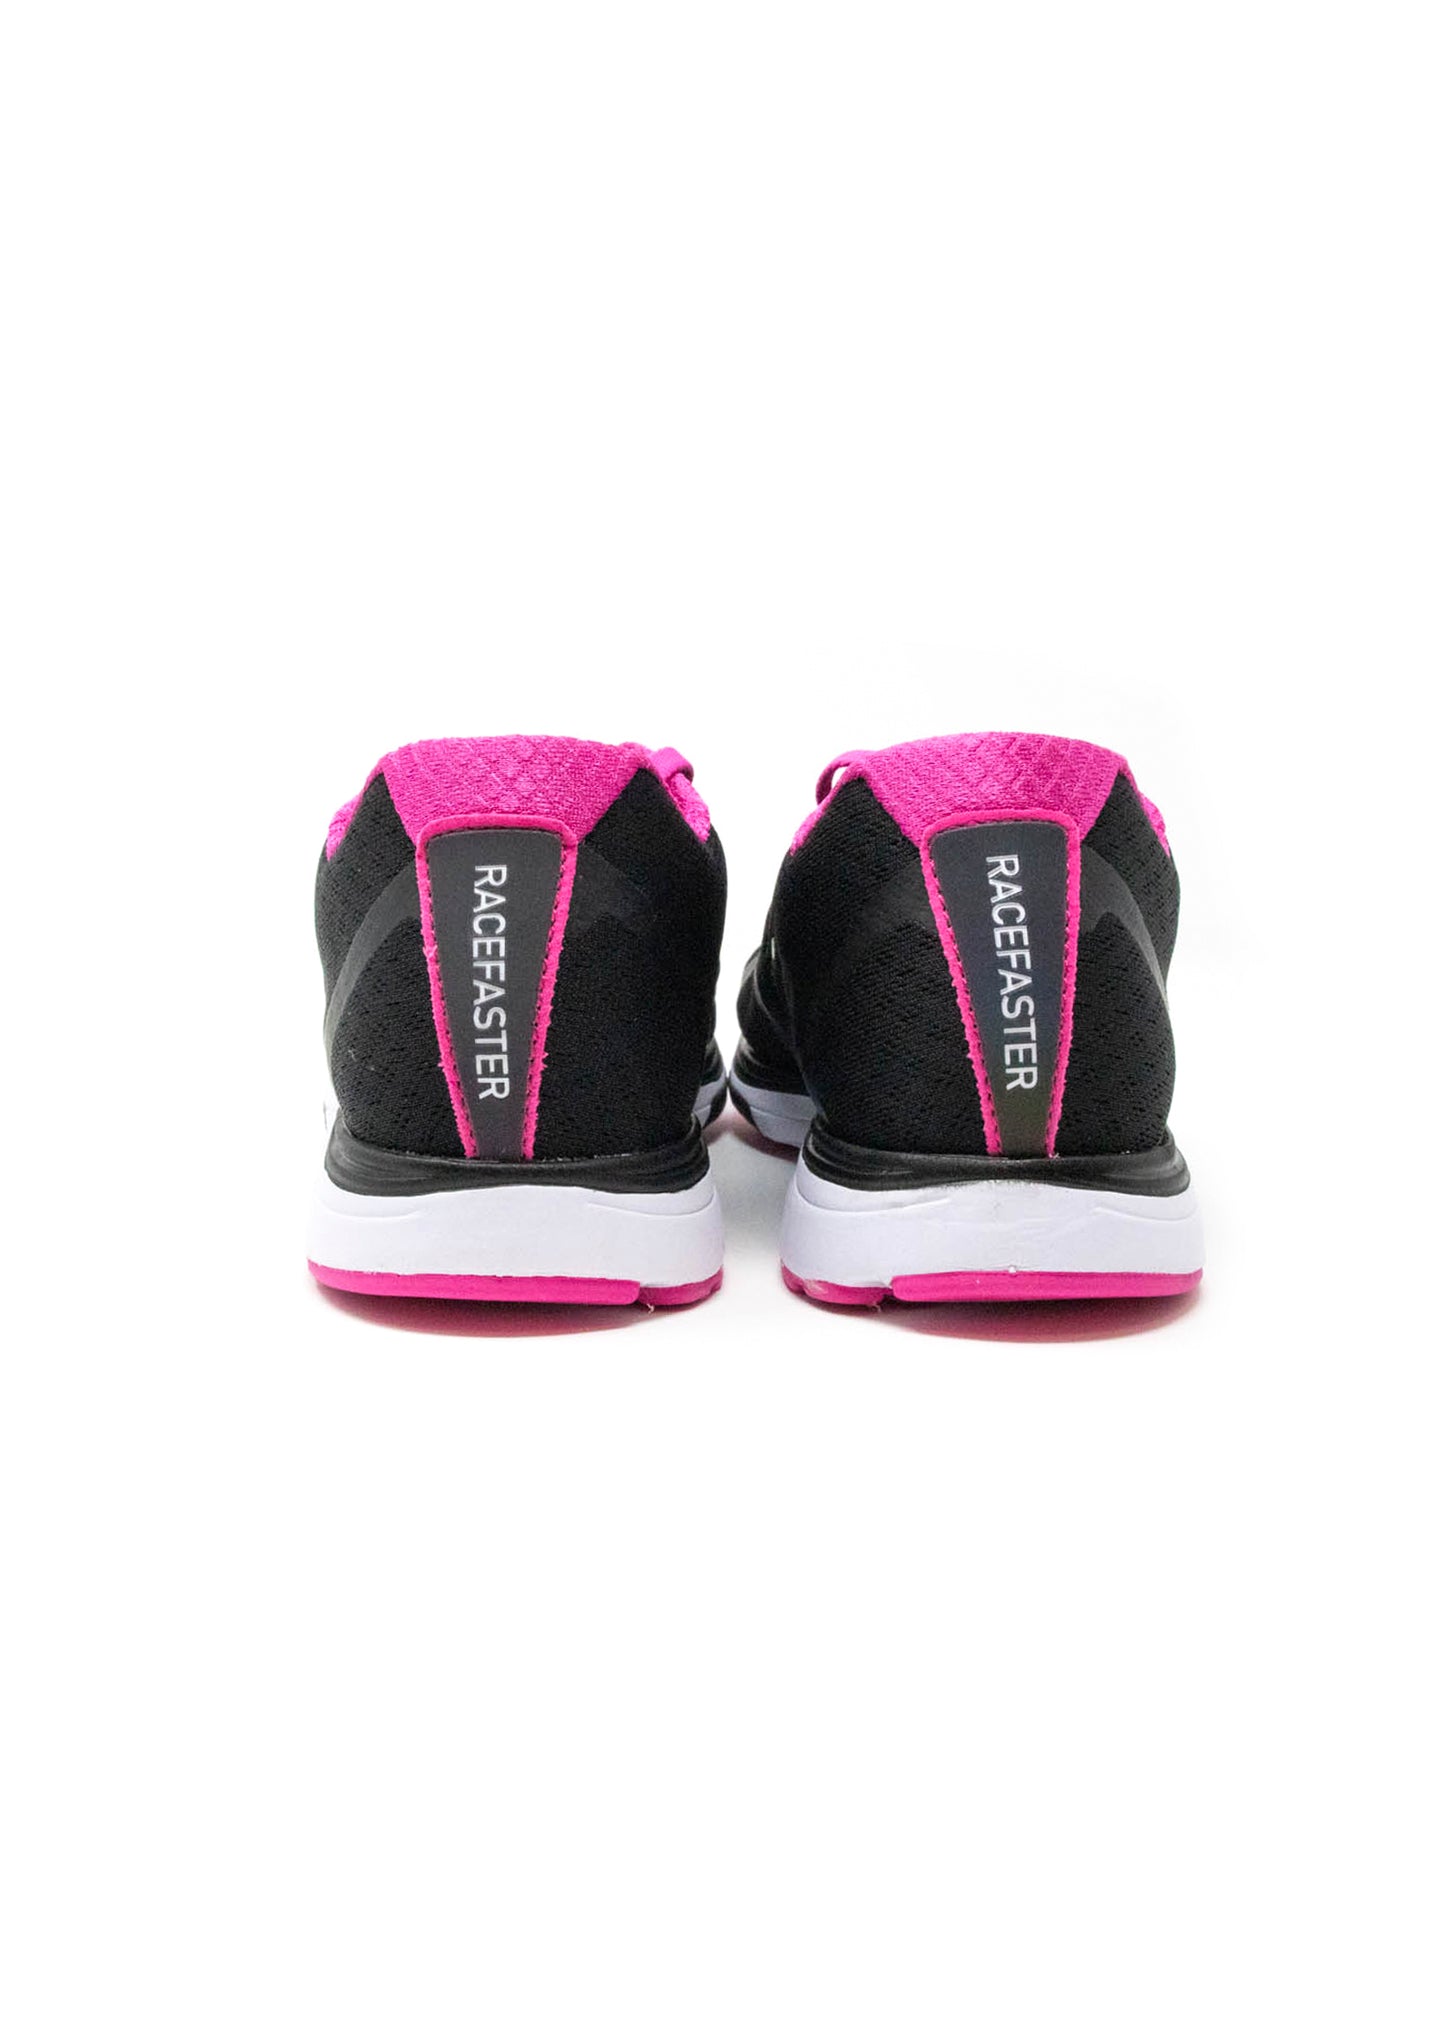 Racefaster FloatHeights - Black/Hot Pink